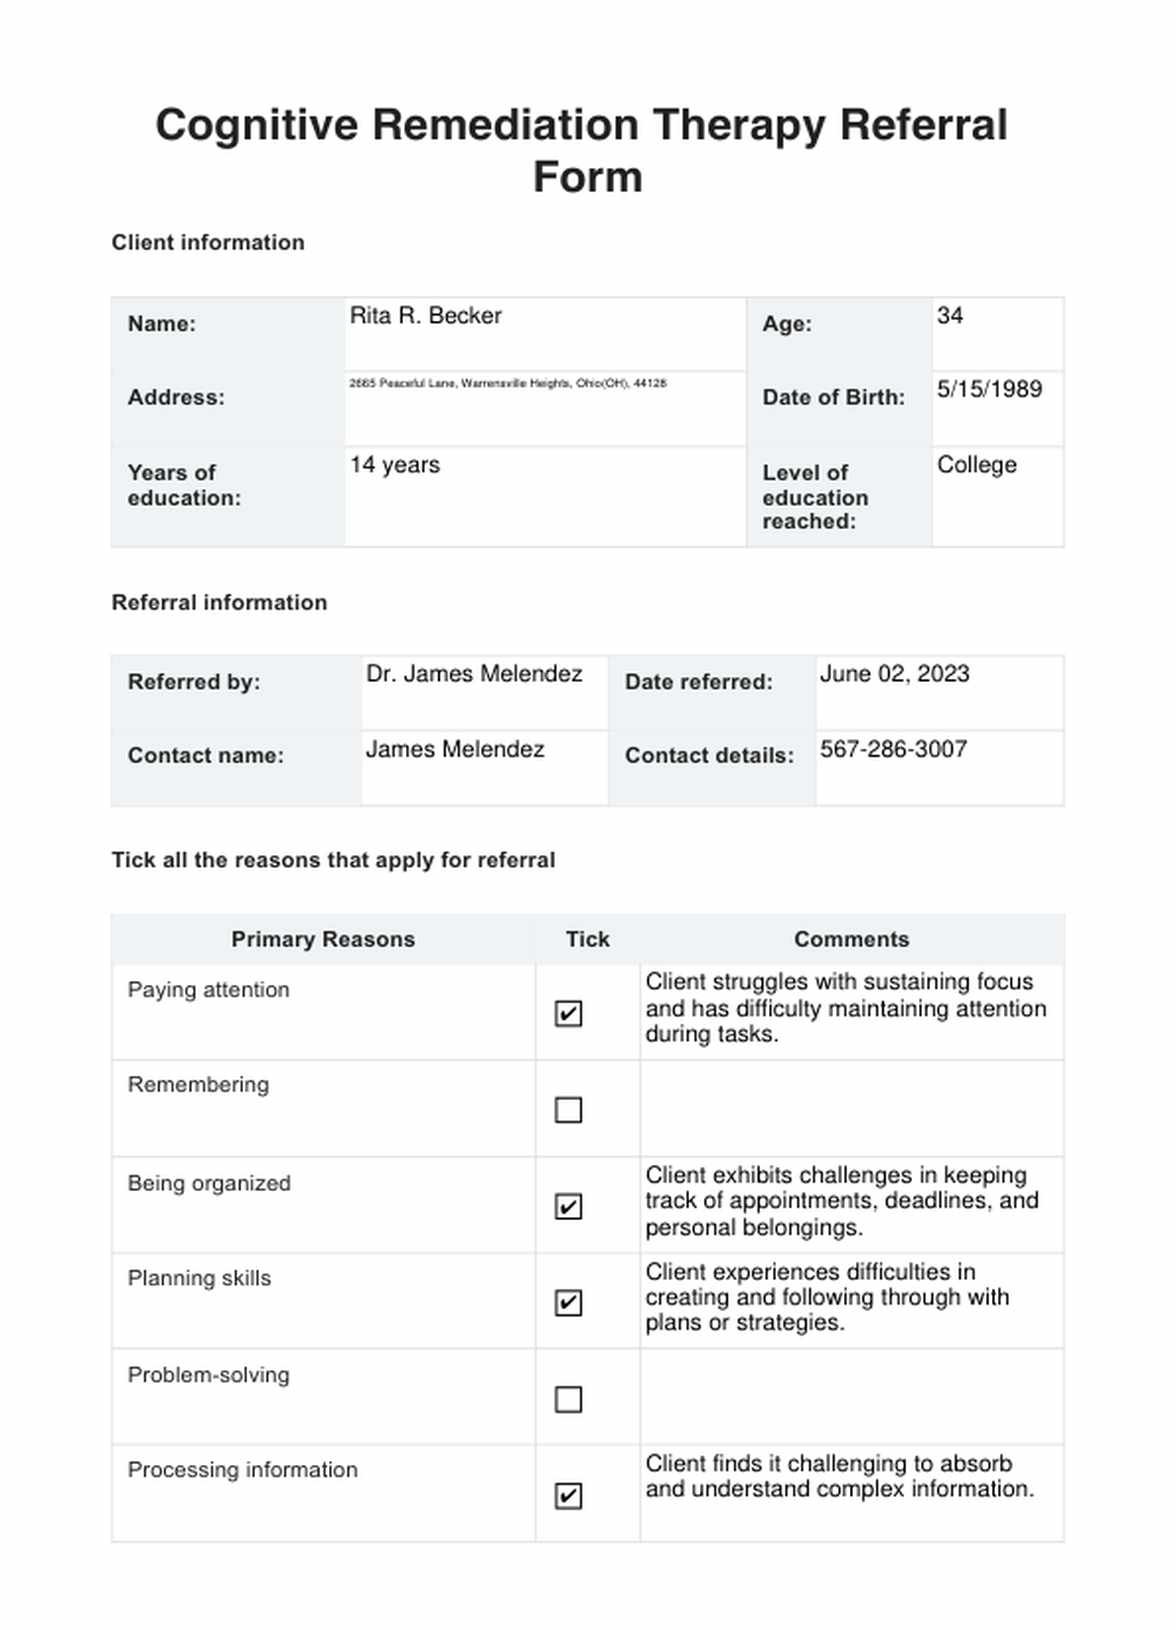 Cognitive Remediation Therapy Referral Form PDF Example